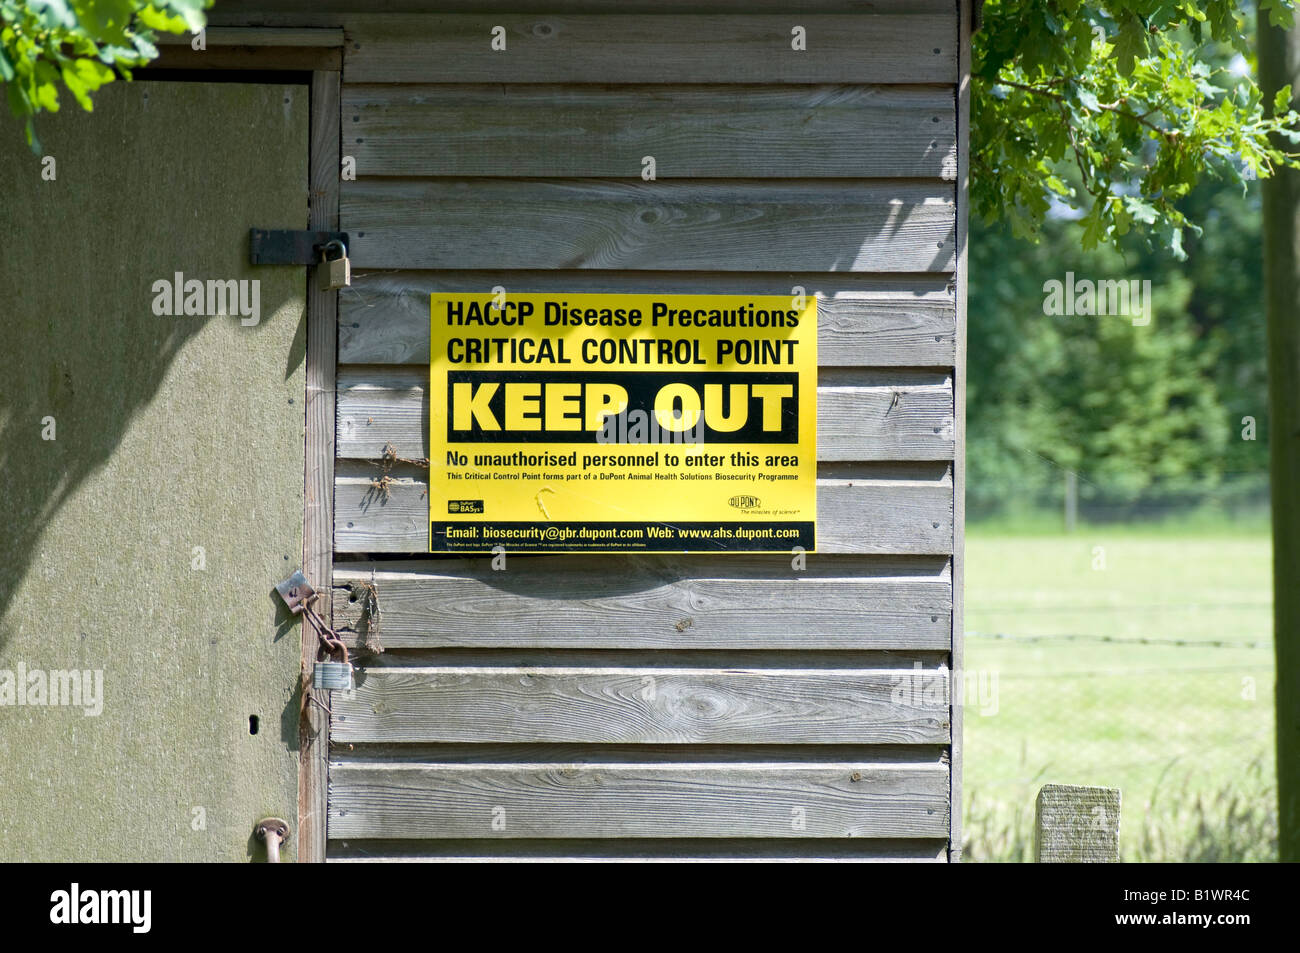 Keep Out disease control notice at farm entrance Stock Photo